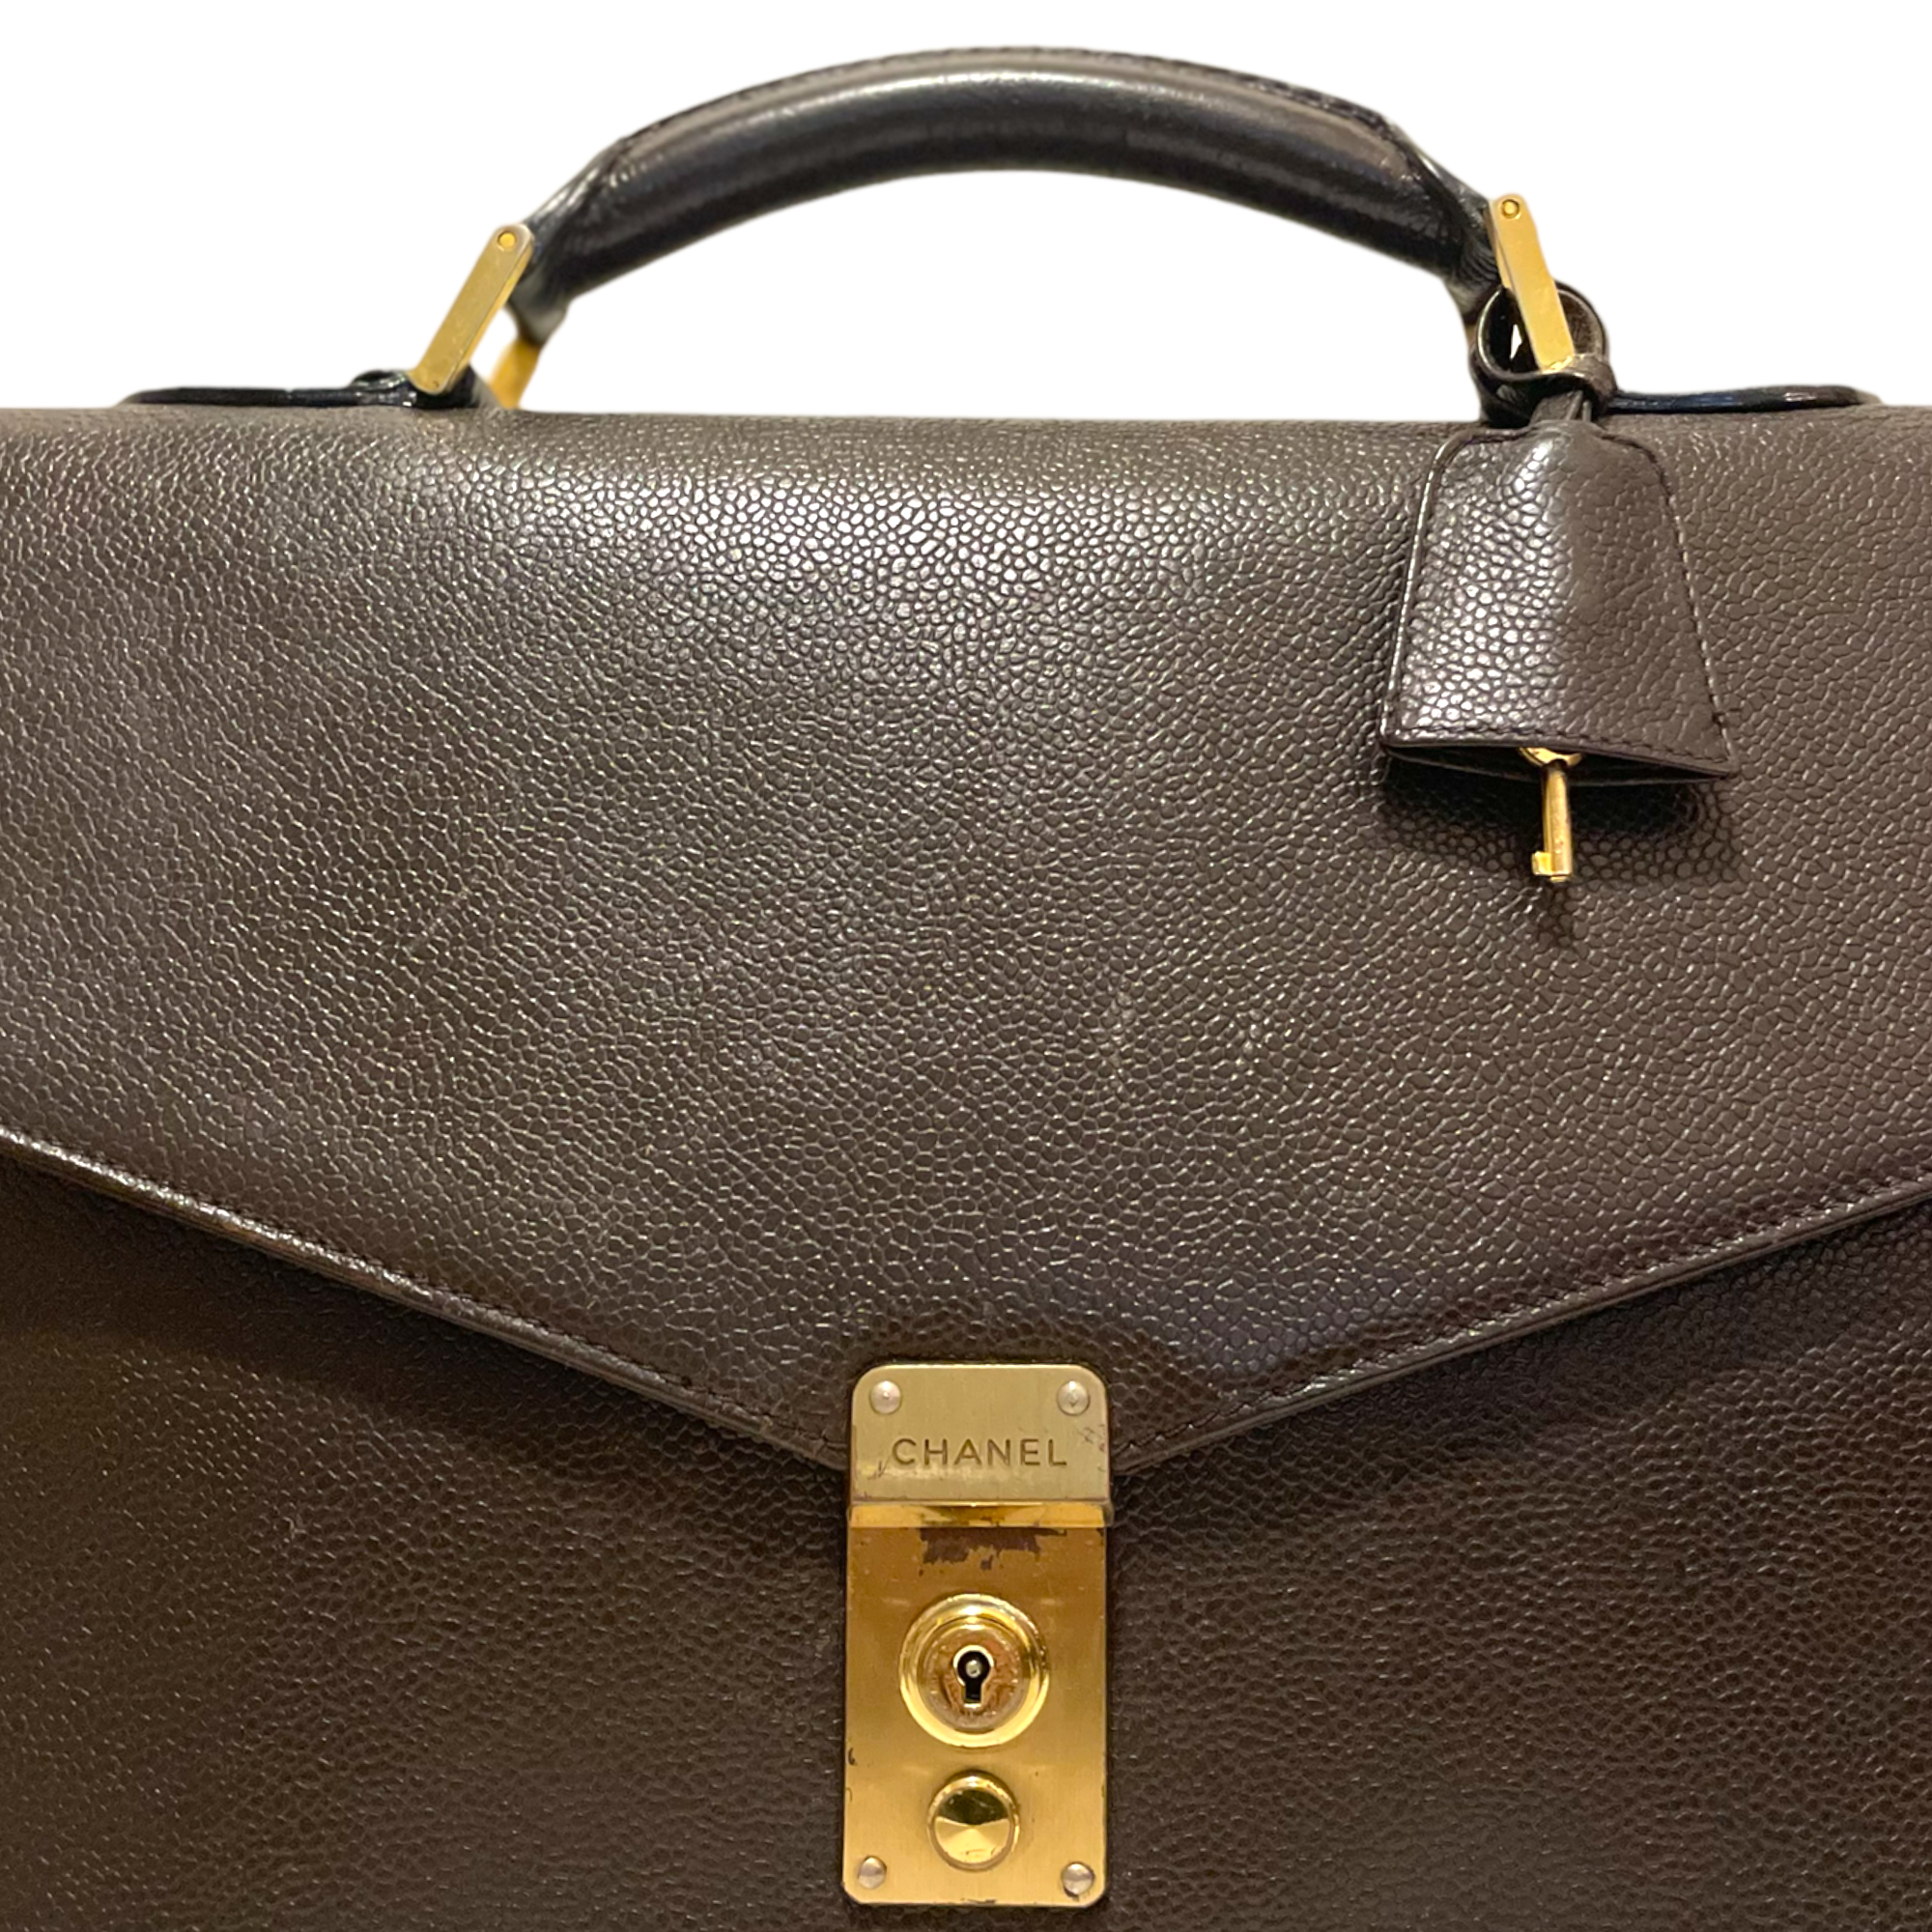 CHANEL Vintage Brown Caviar Leather Briefcase with Gold 'CHANEL' Logo Clasp